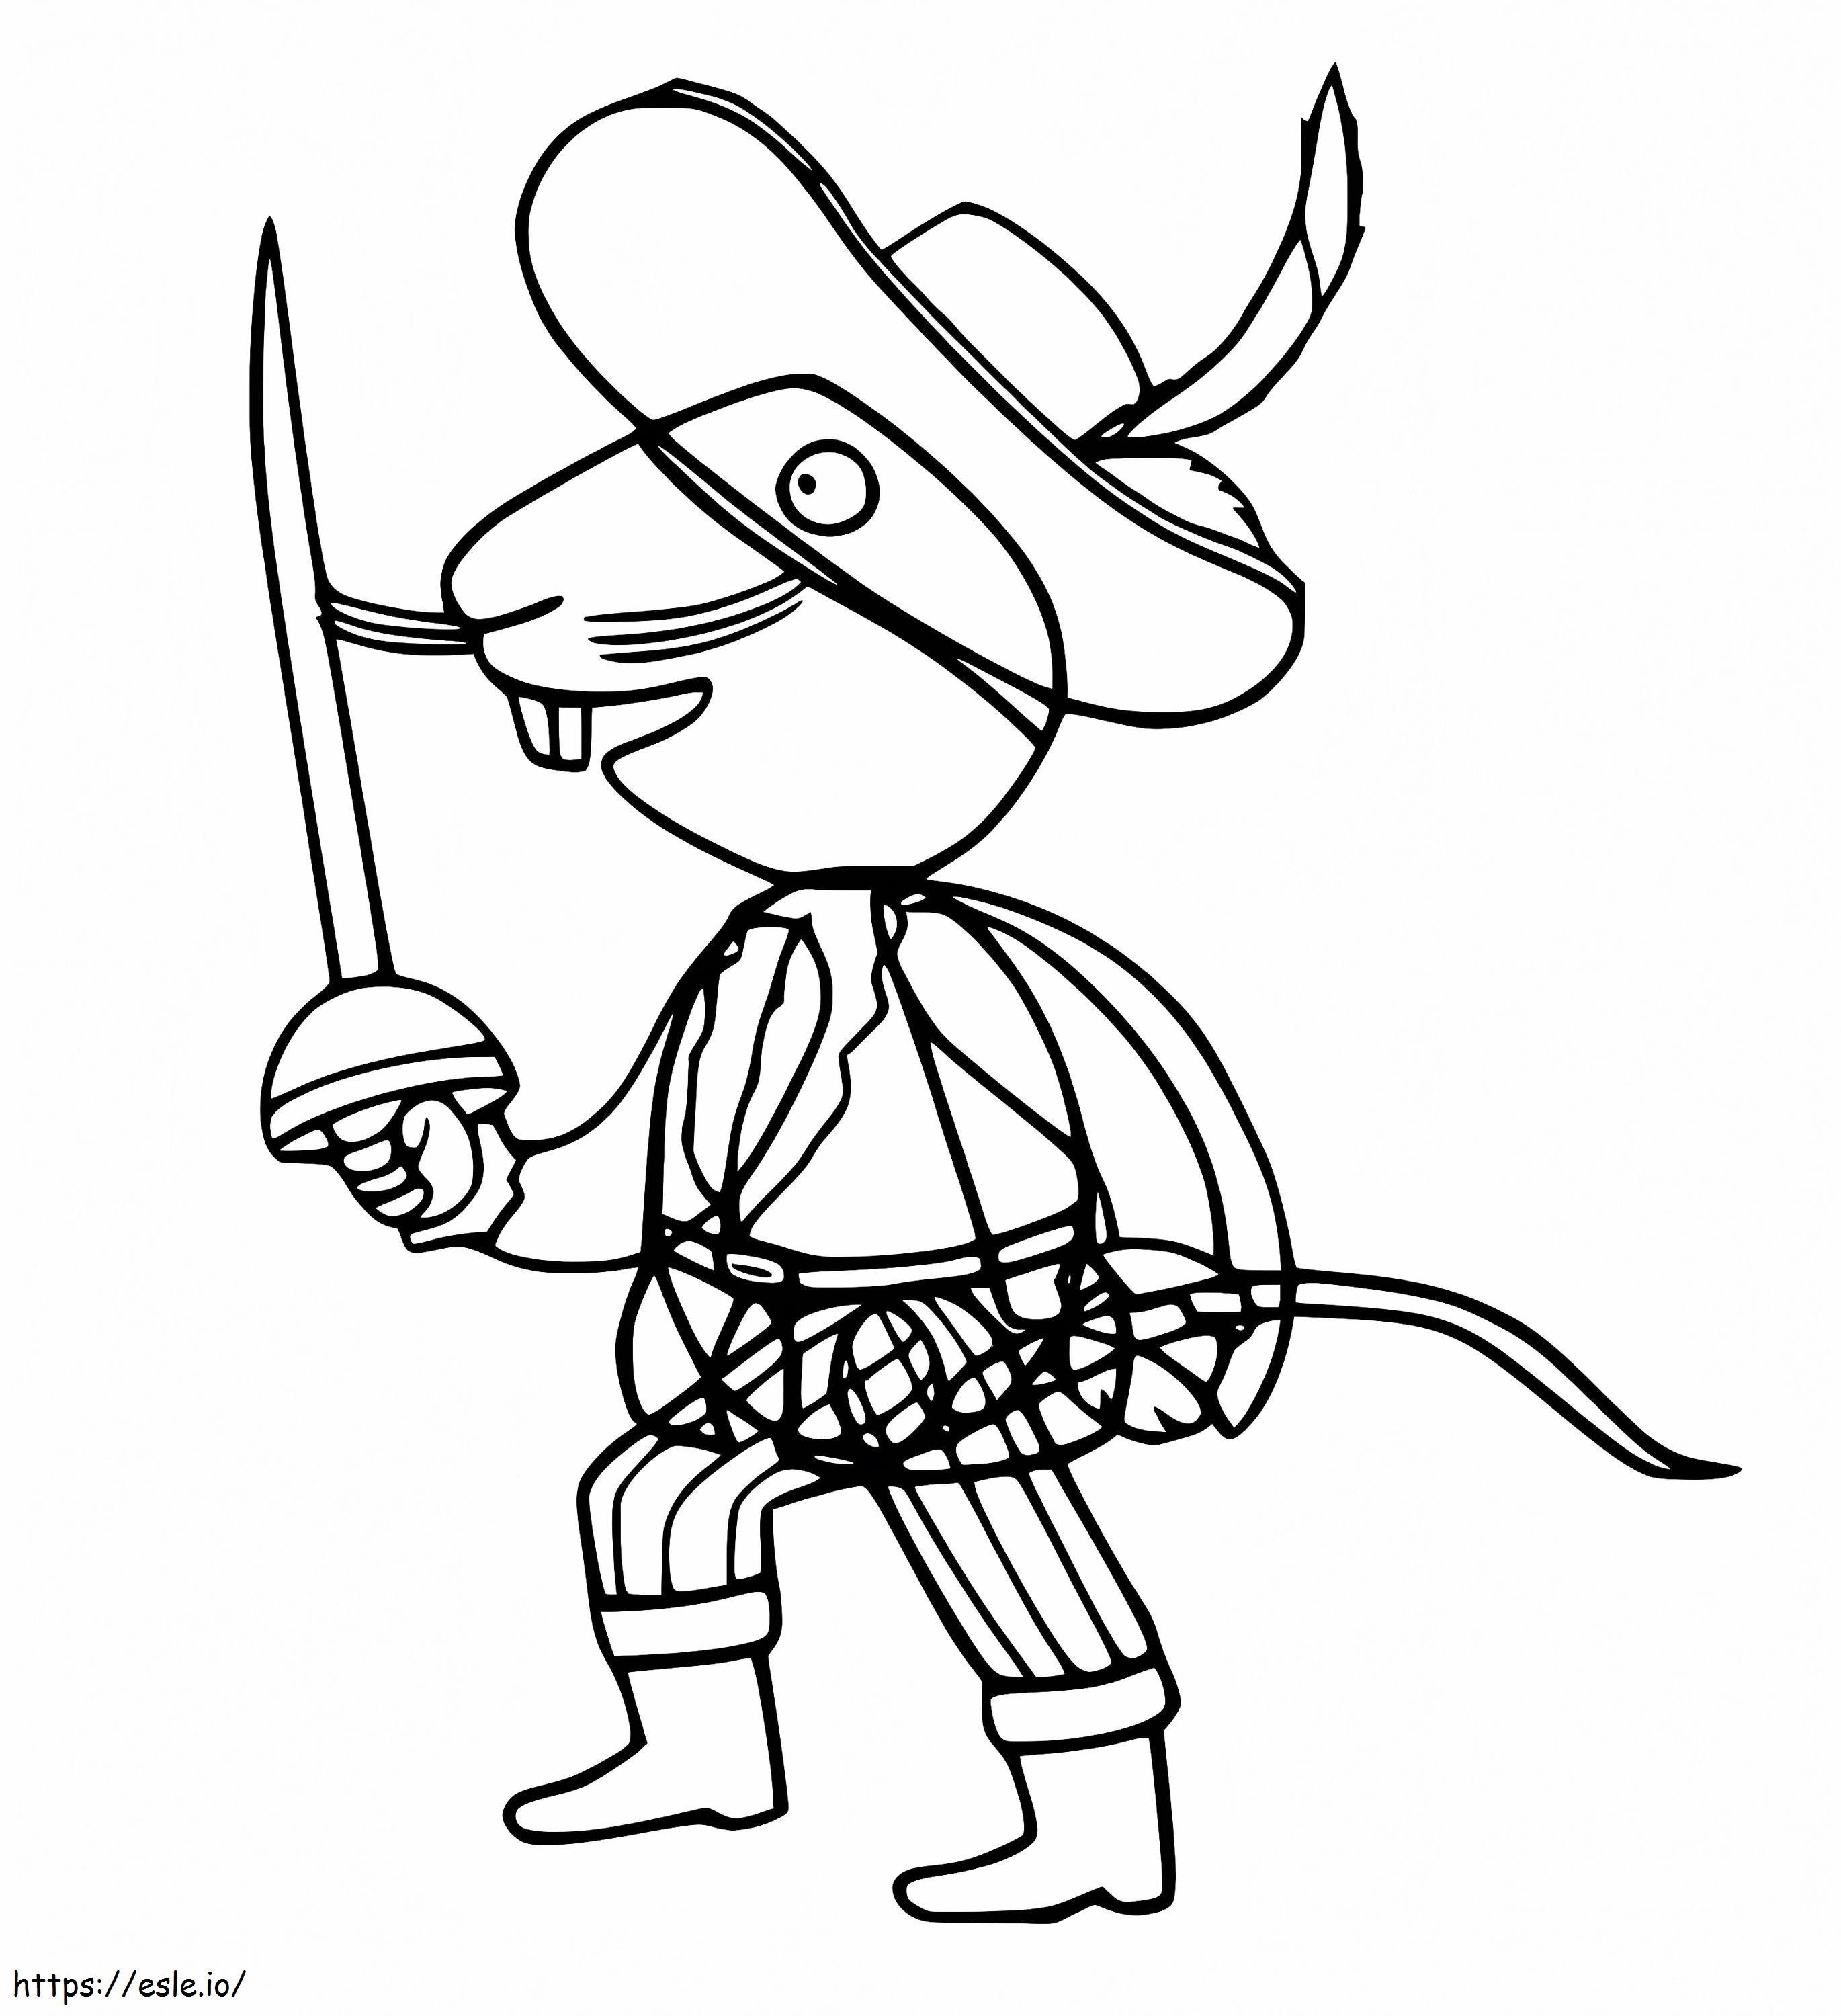 Easy Highway Rat coloring page